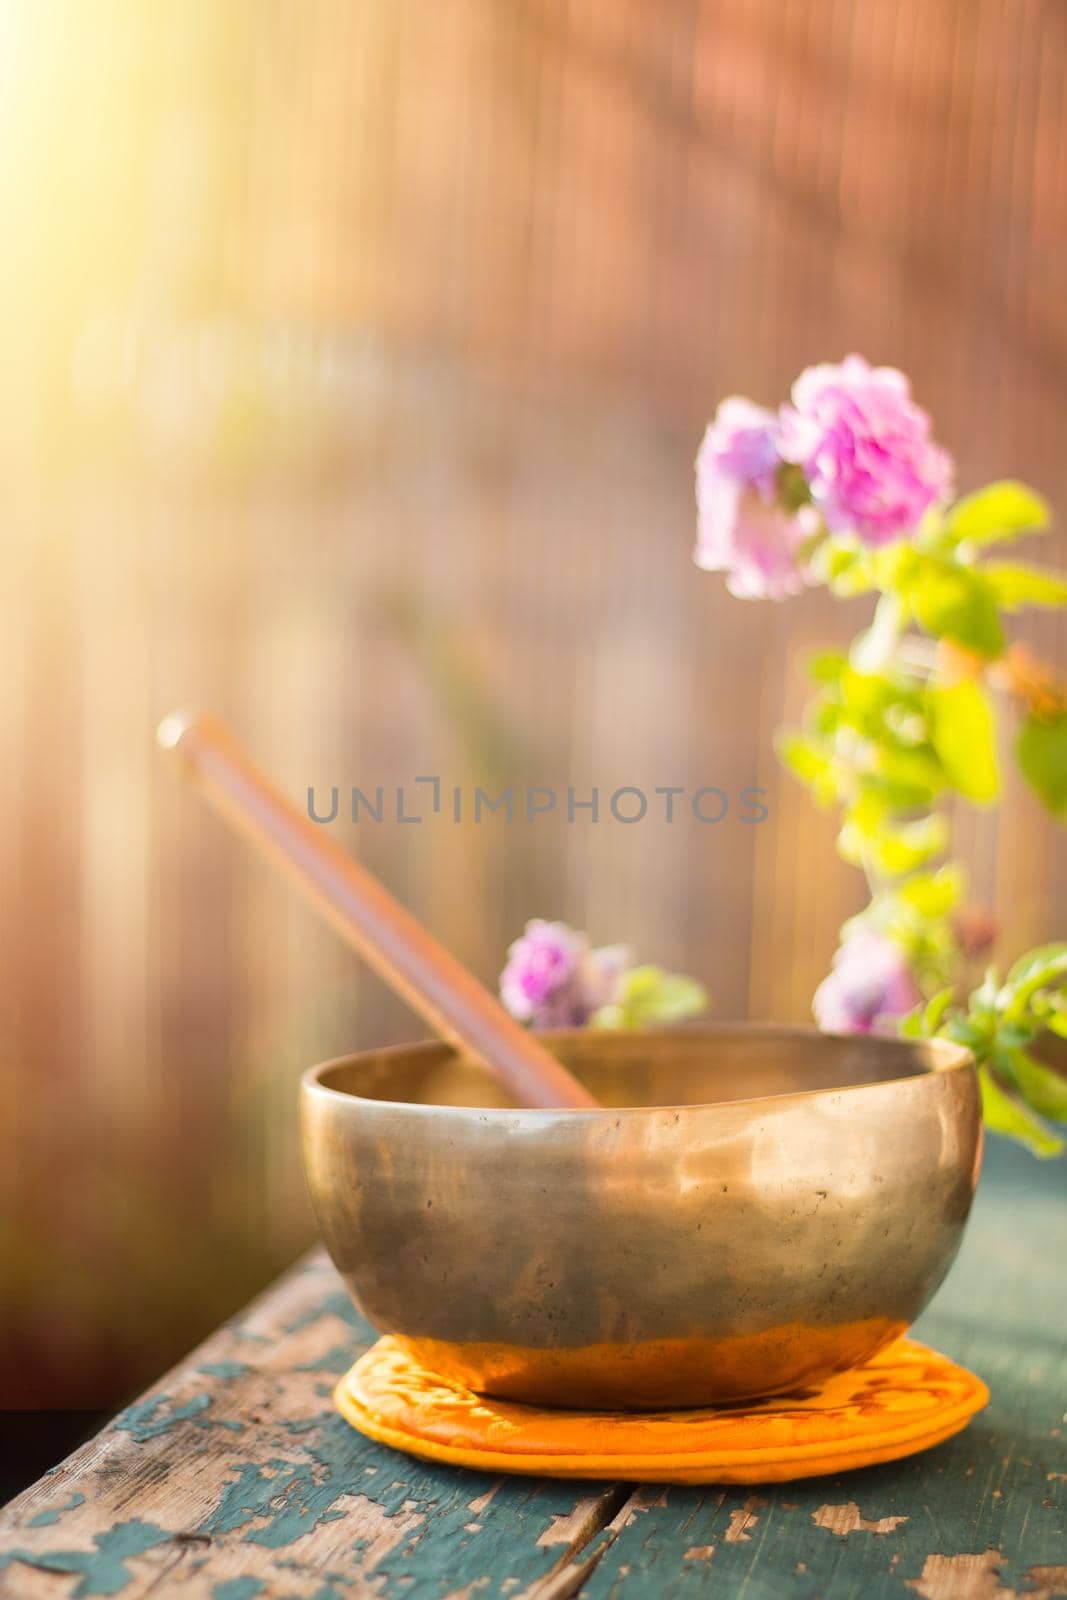 Singing bowl on a rustic wooden table with flowers, zen, outdoors by Daxenbichler